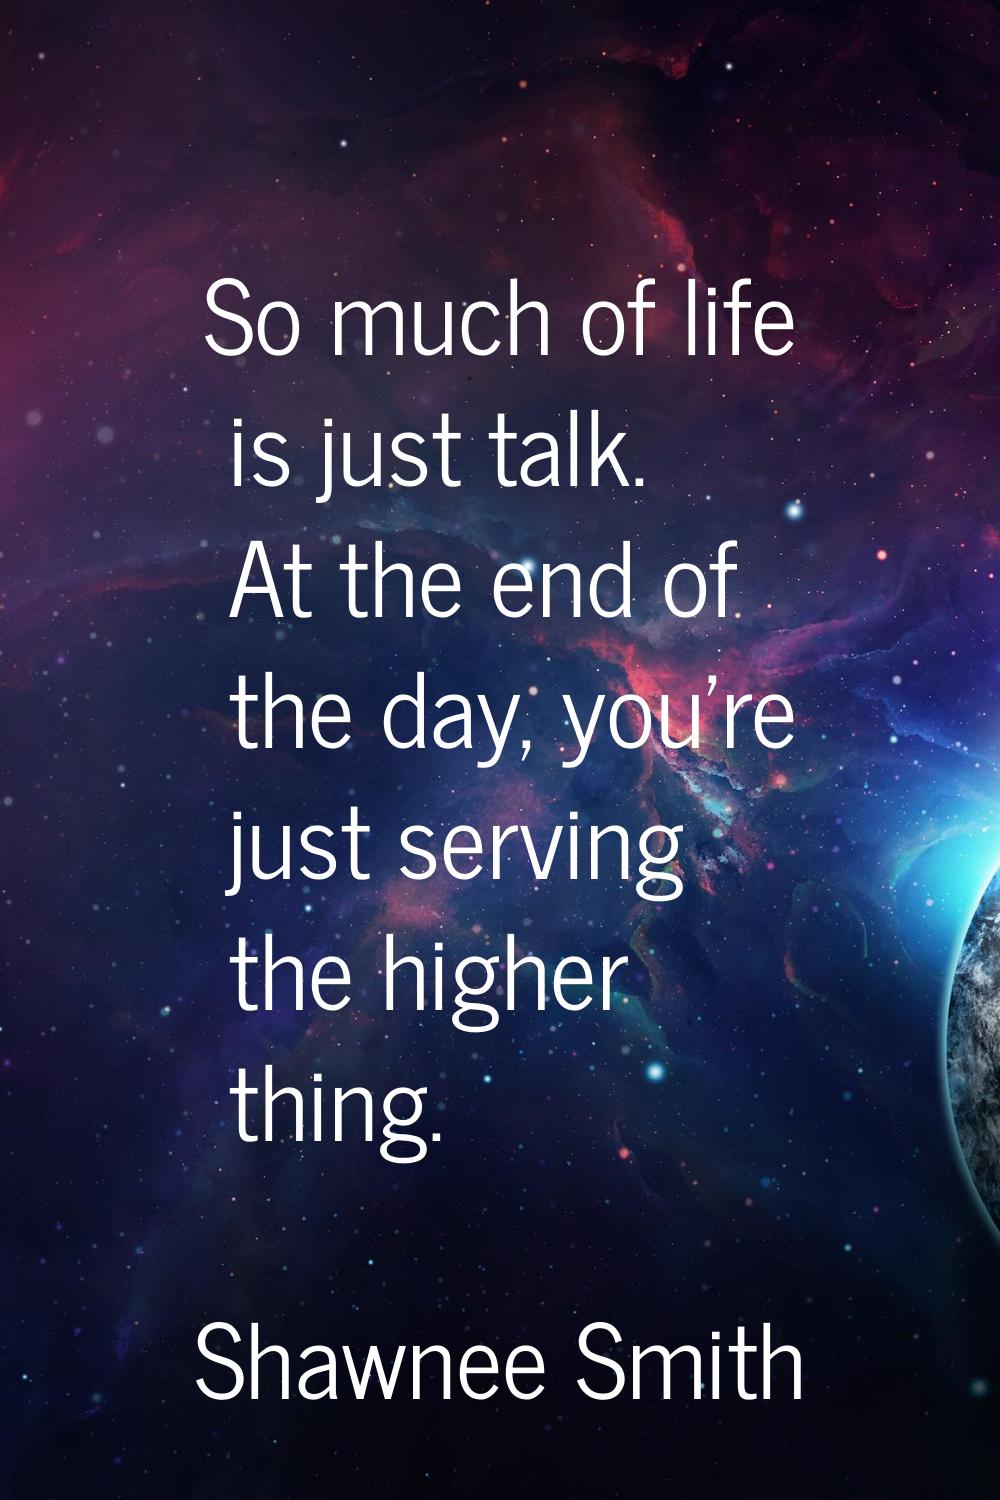 So much of life is just talk. At the end of the day, you're just serving the higher thing.